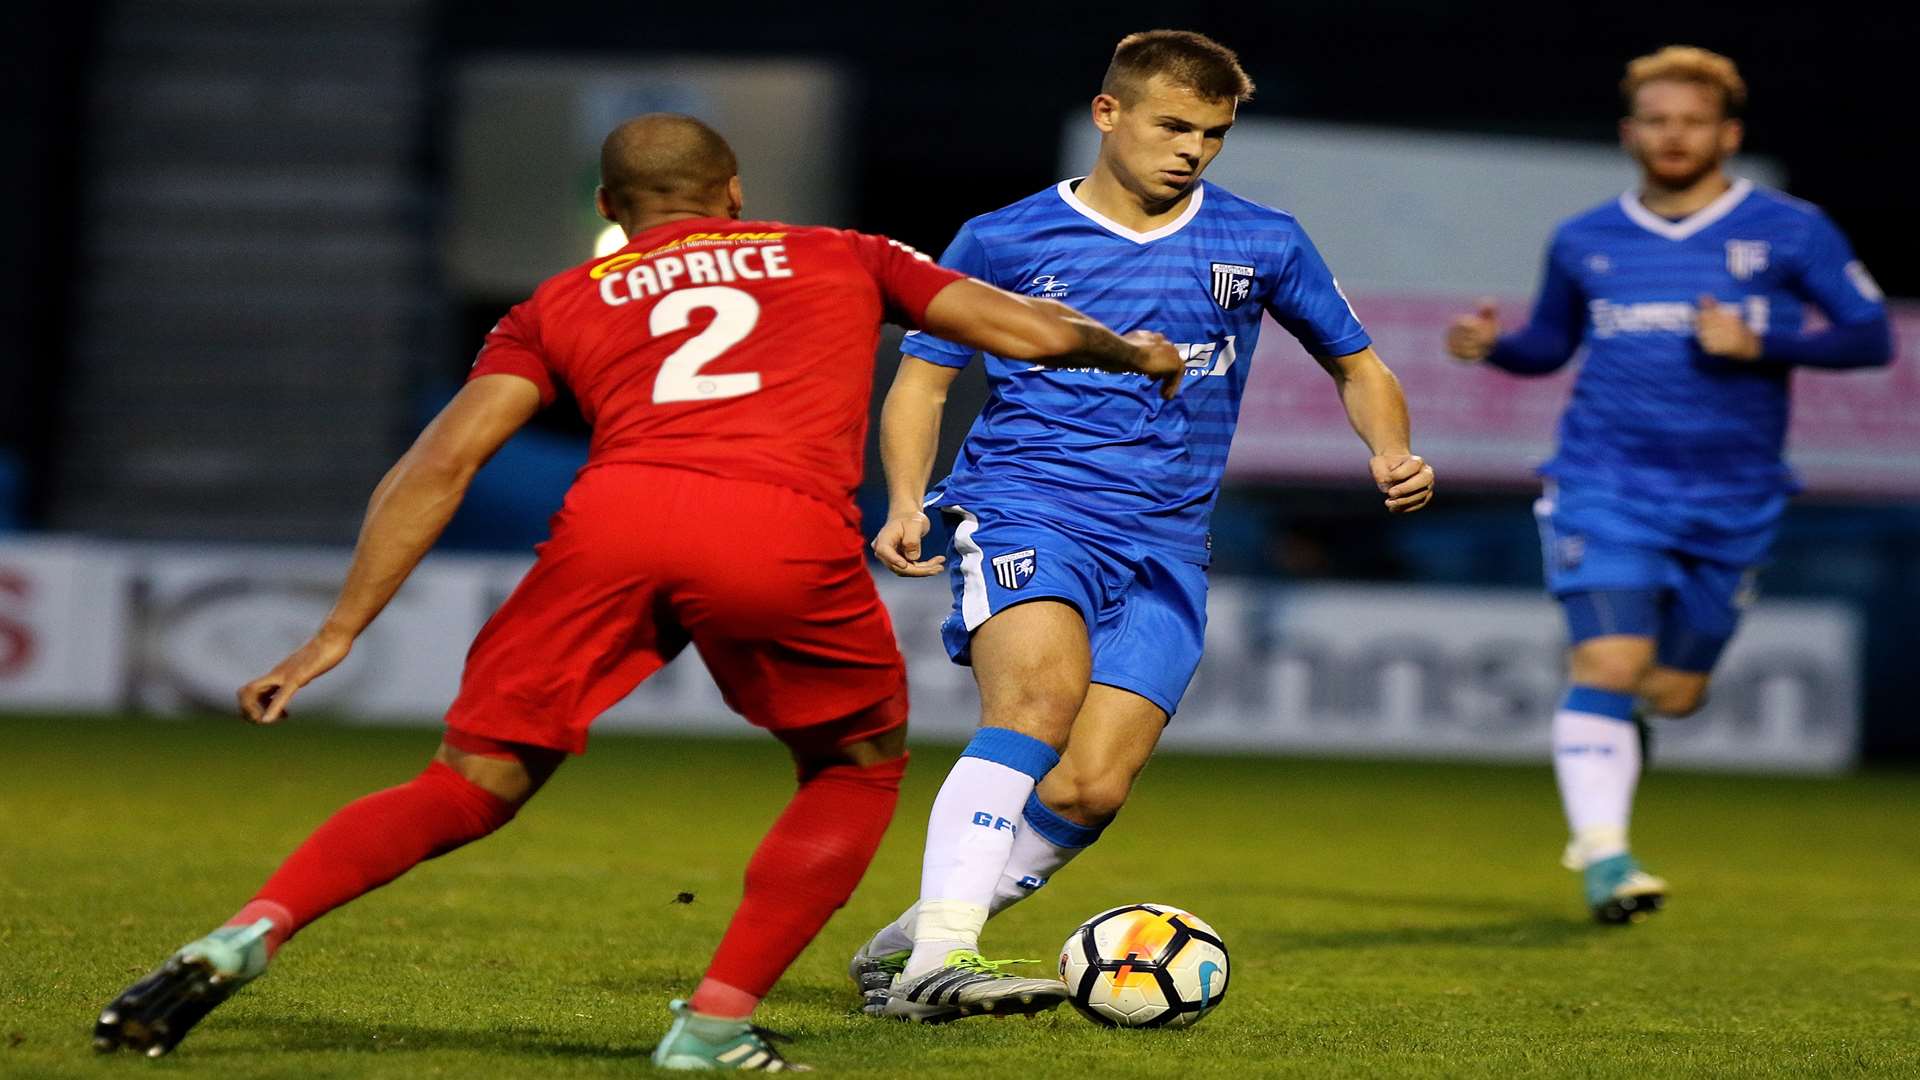 Gillingham's Jake Hessenthaler on the ball against Leyton Orient. Picture: Andy Jones